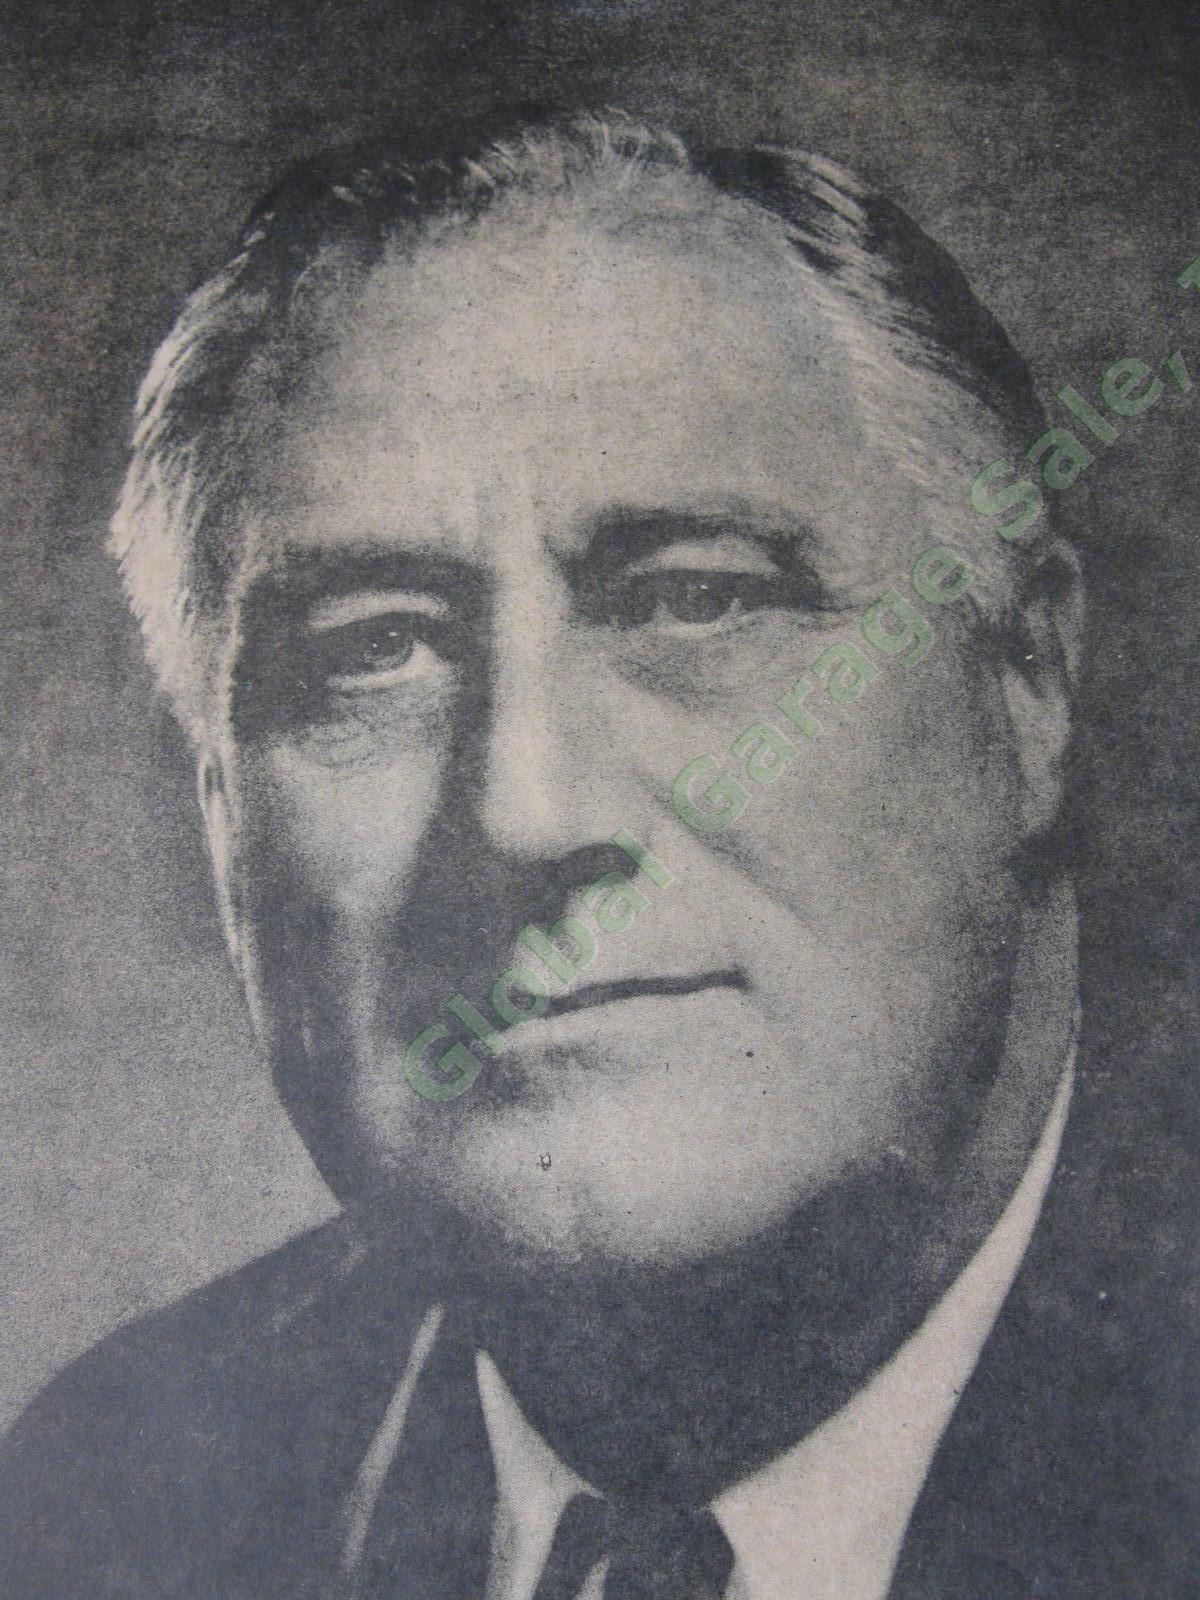 ORIGINAL 1936 President Campaign Poster CARRY ON WITH Franklin D Roosevelt FDR 3